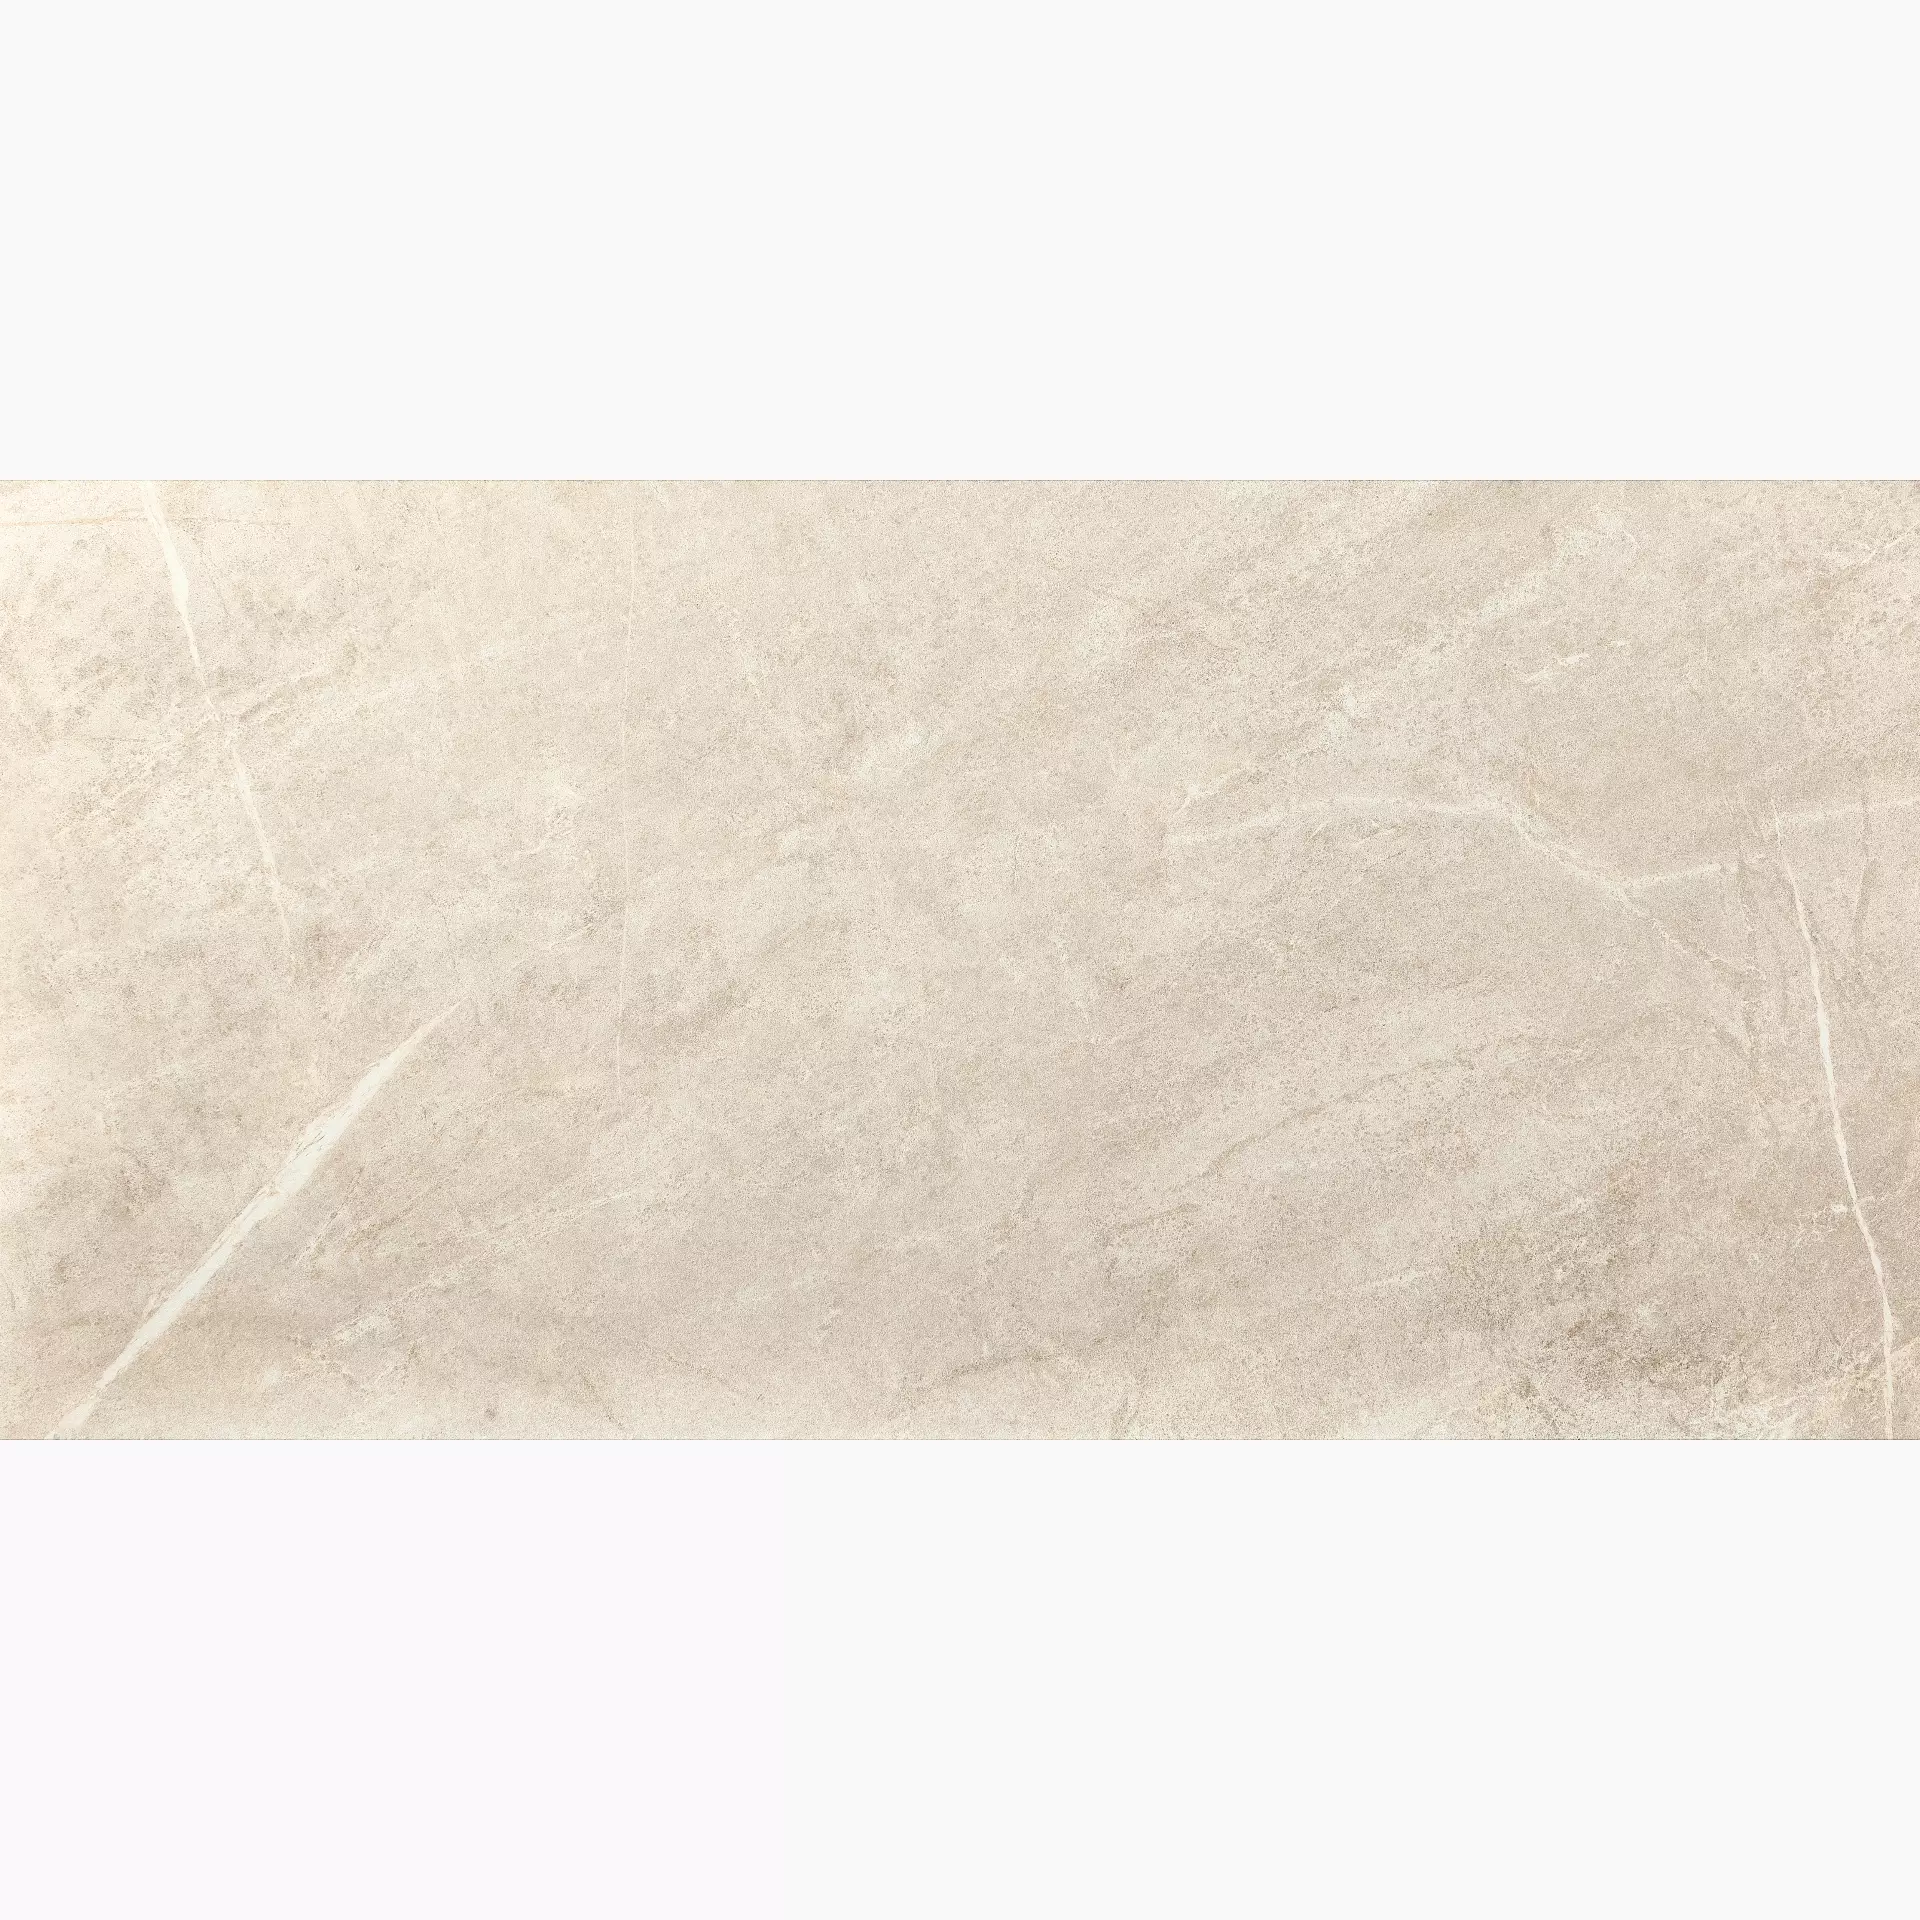 Coem Soap Stone White Naturale 0SO361R 30x60cm rectified 9mm